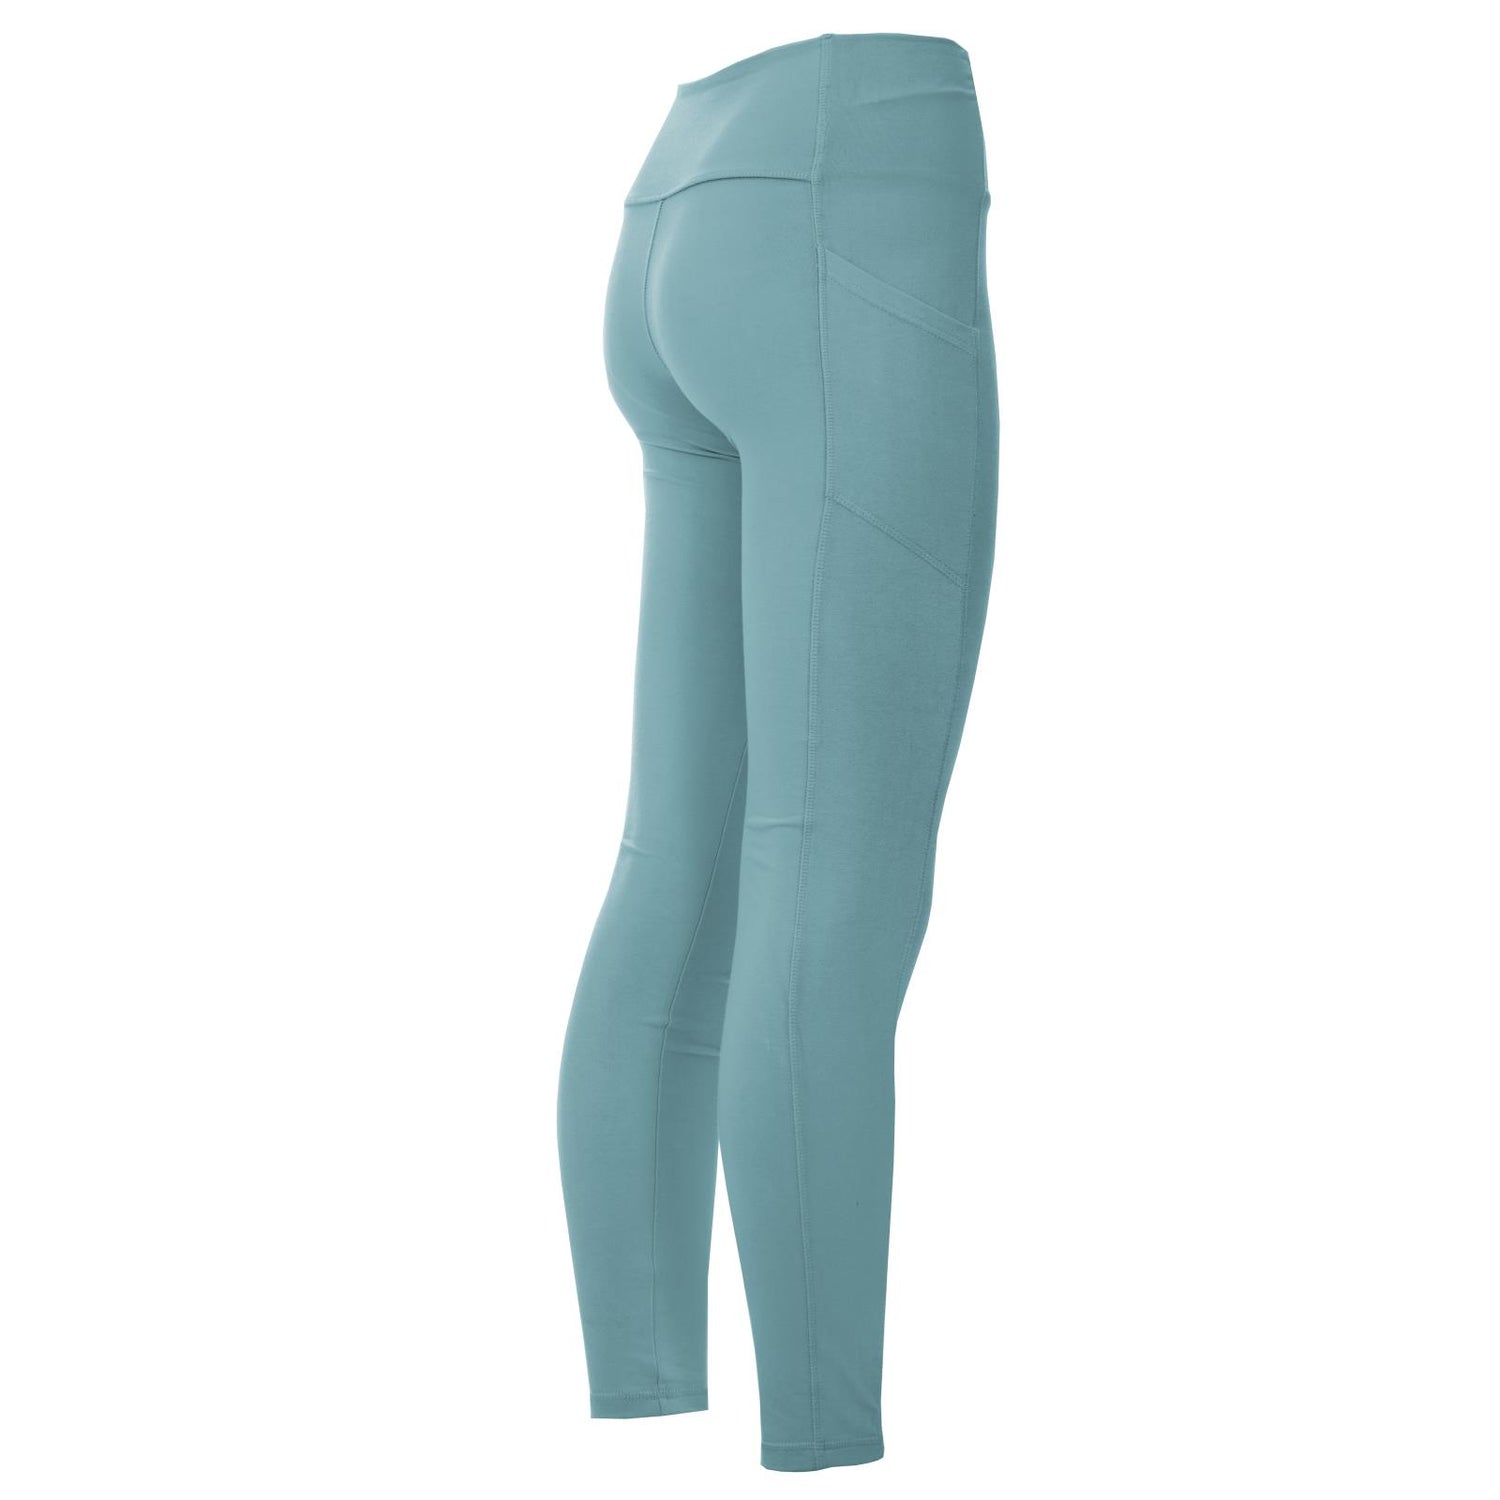 Women's Luxe Stretch Leggings with Pockets in Glacier